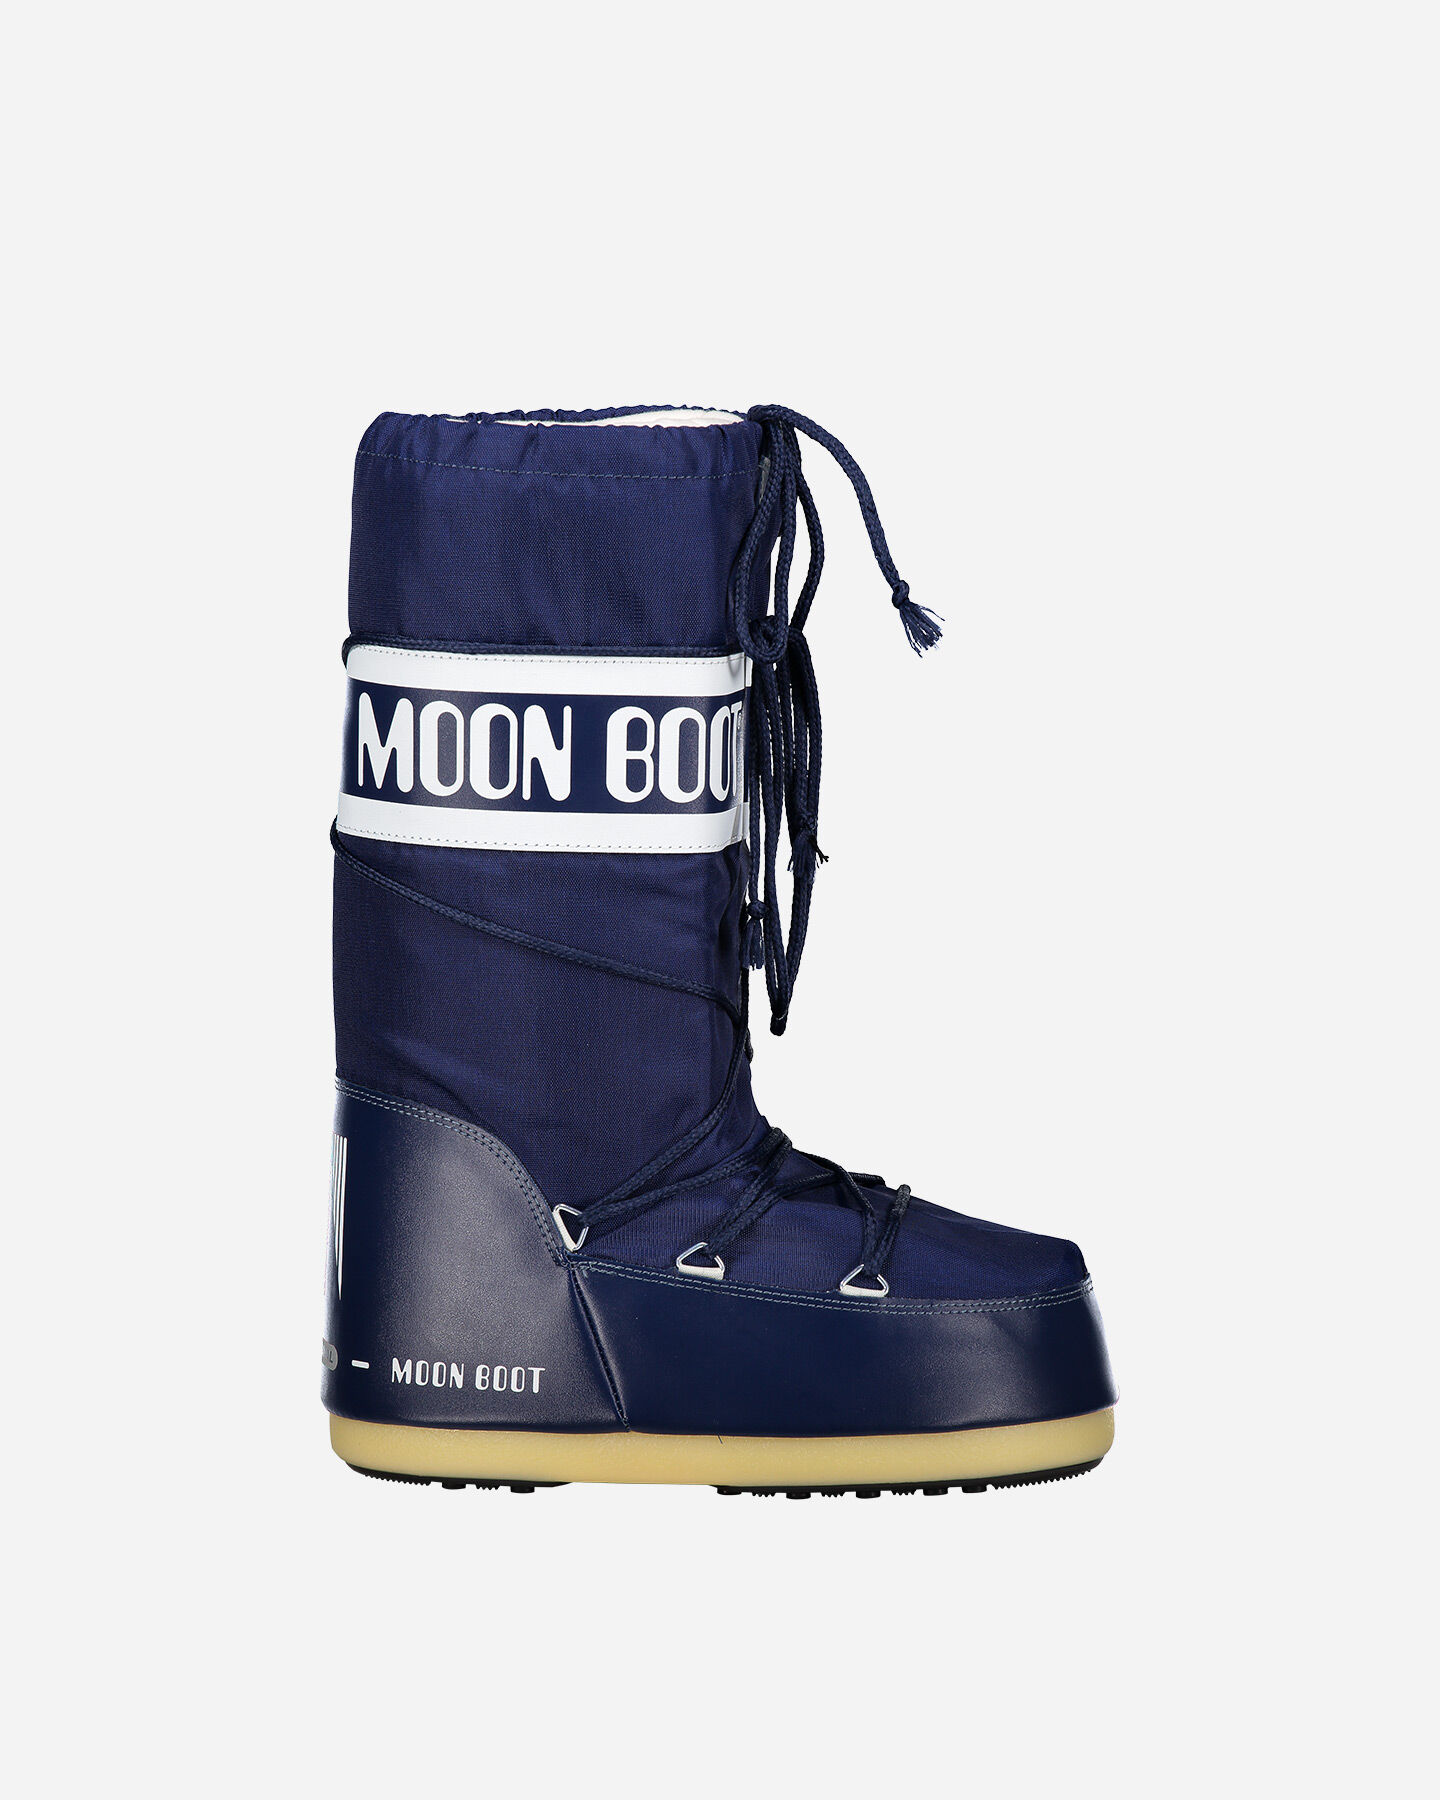  Doposci MOON BOOT MOON BOOT M S0595667|660|2326 scatto 0